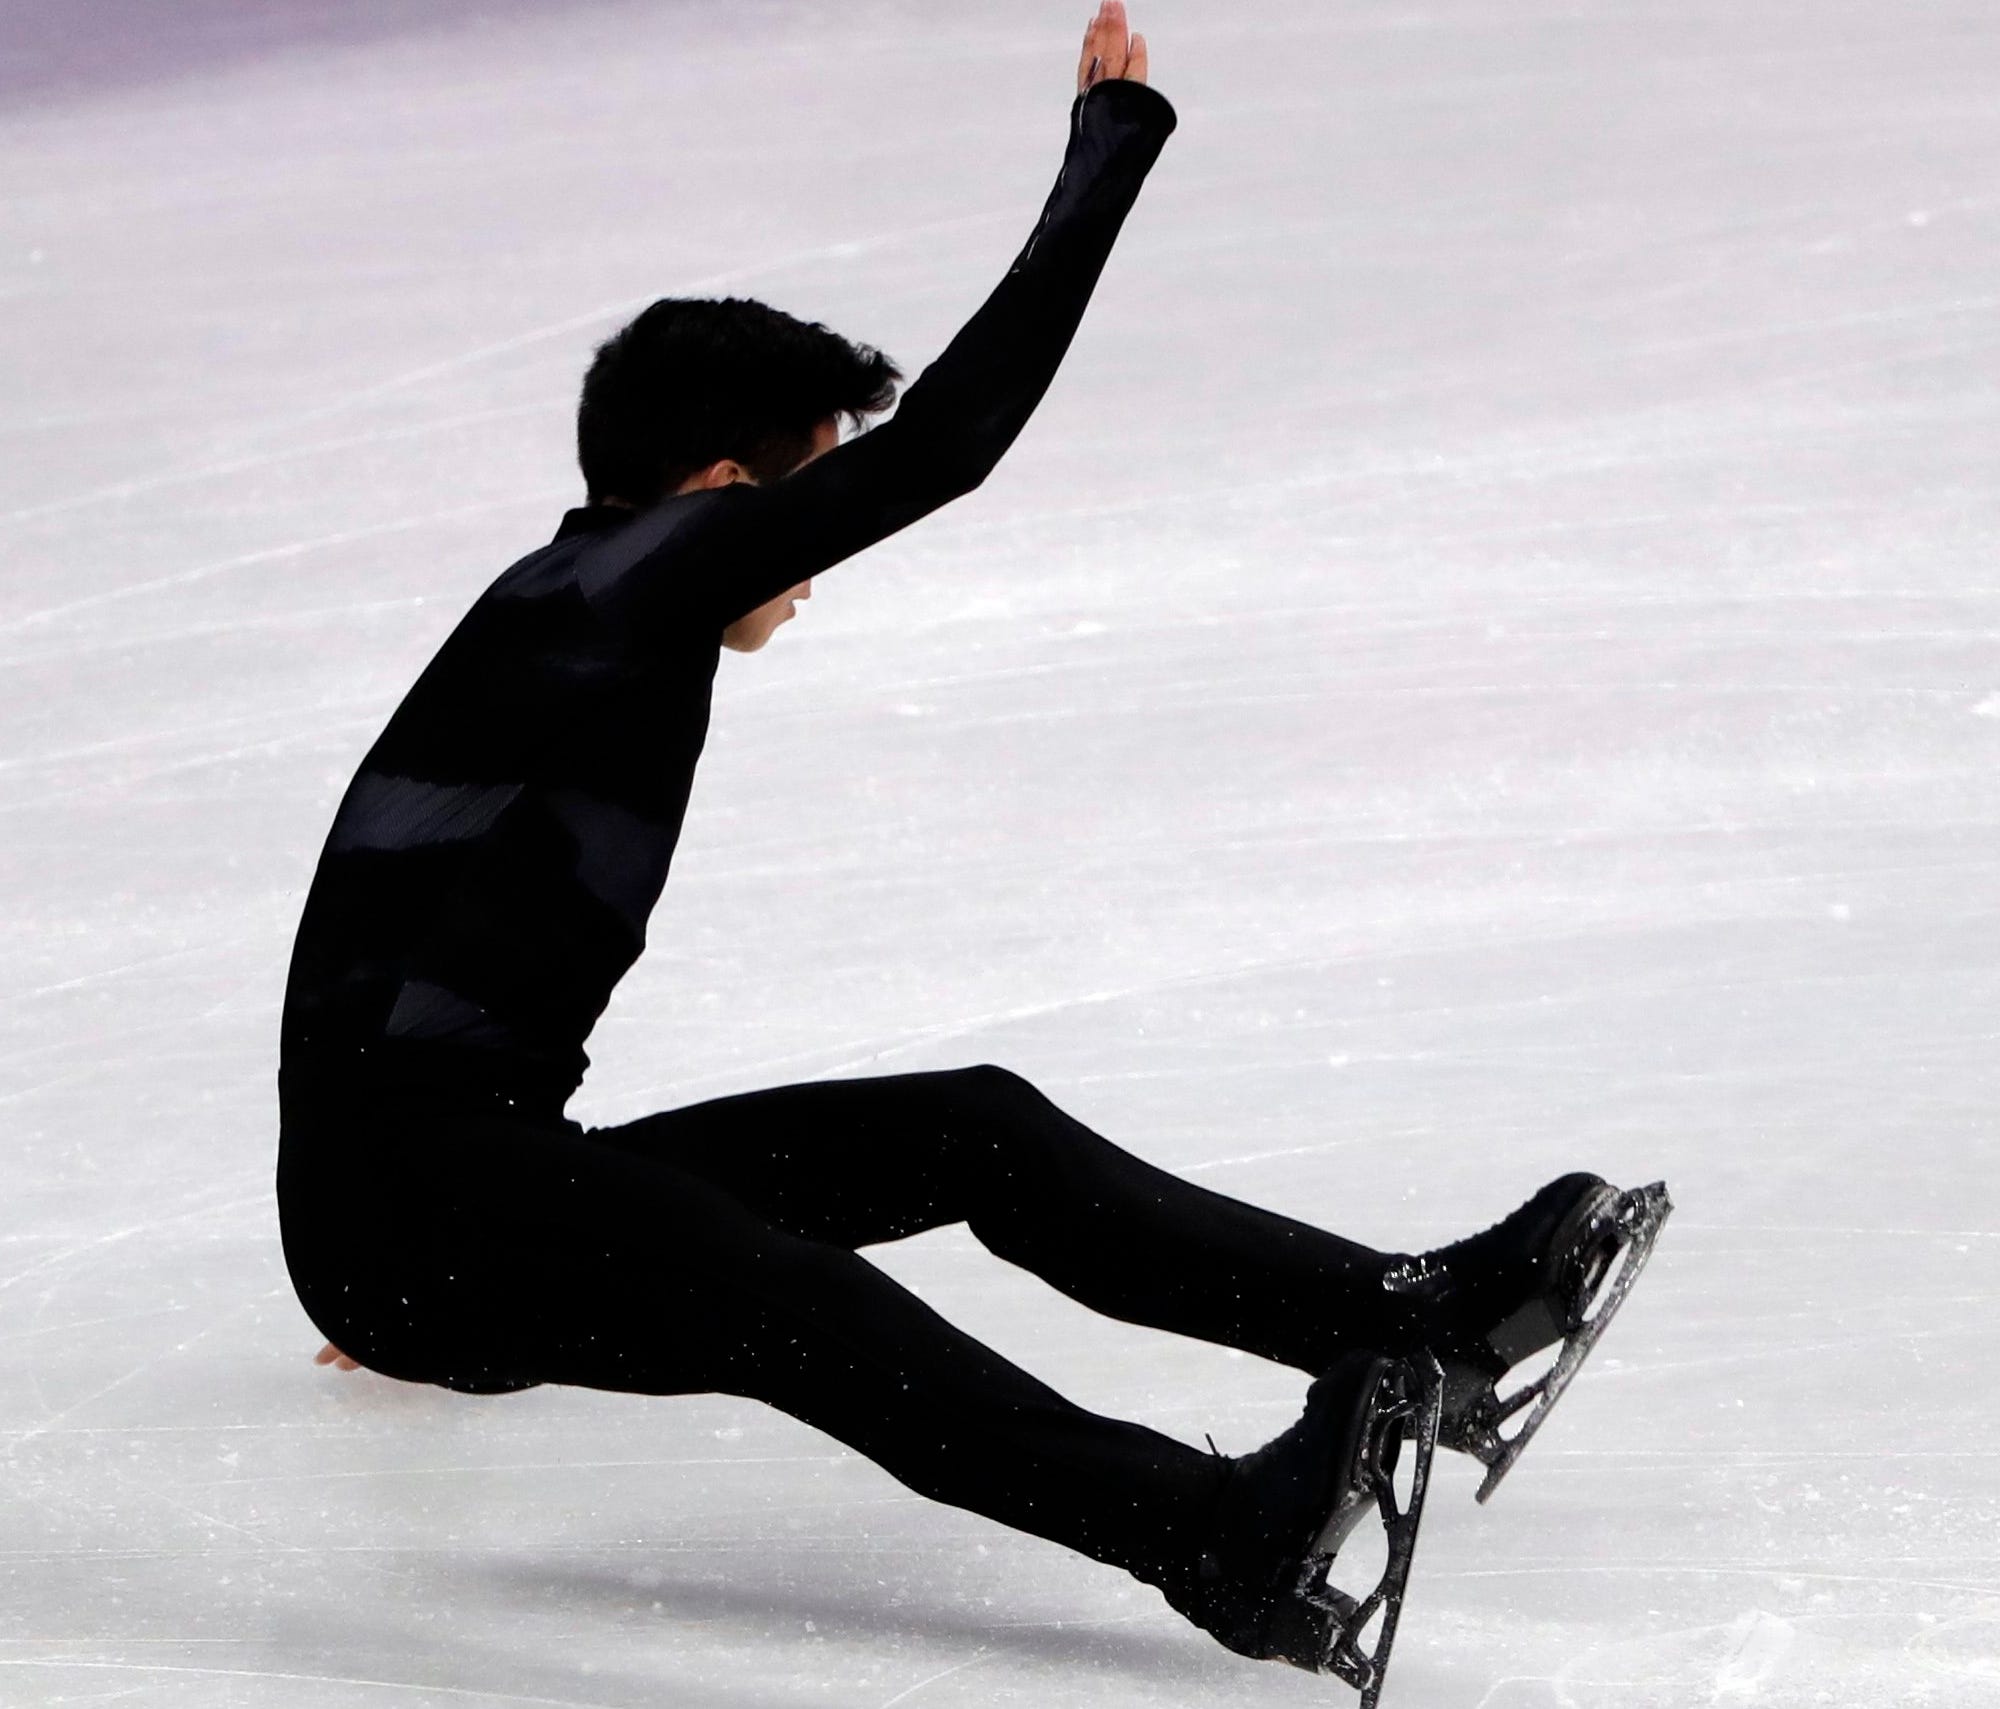 United States' Nathan Chen falls in the men's single short program team event at the 2018 Winter Olympics in Gangneung, South Korea, Friday.